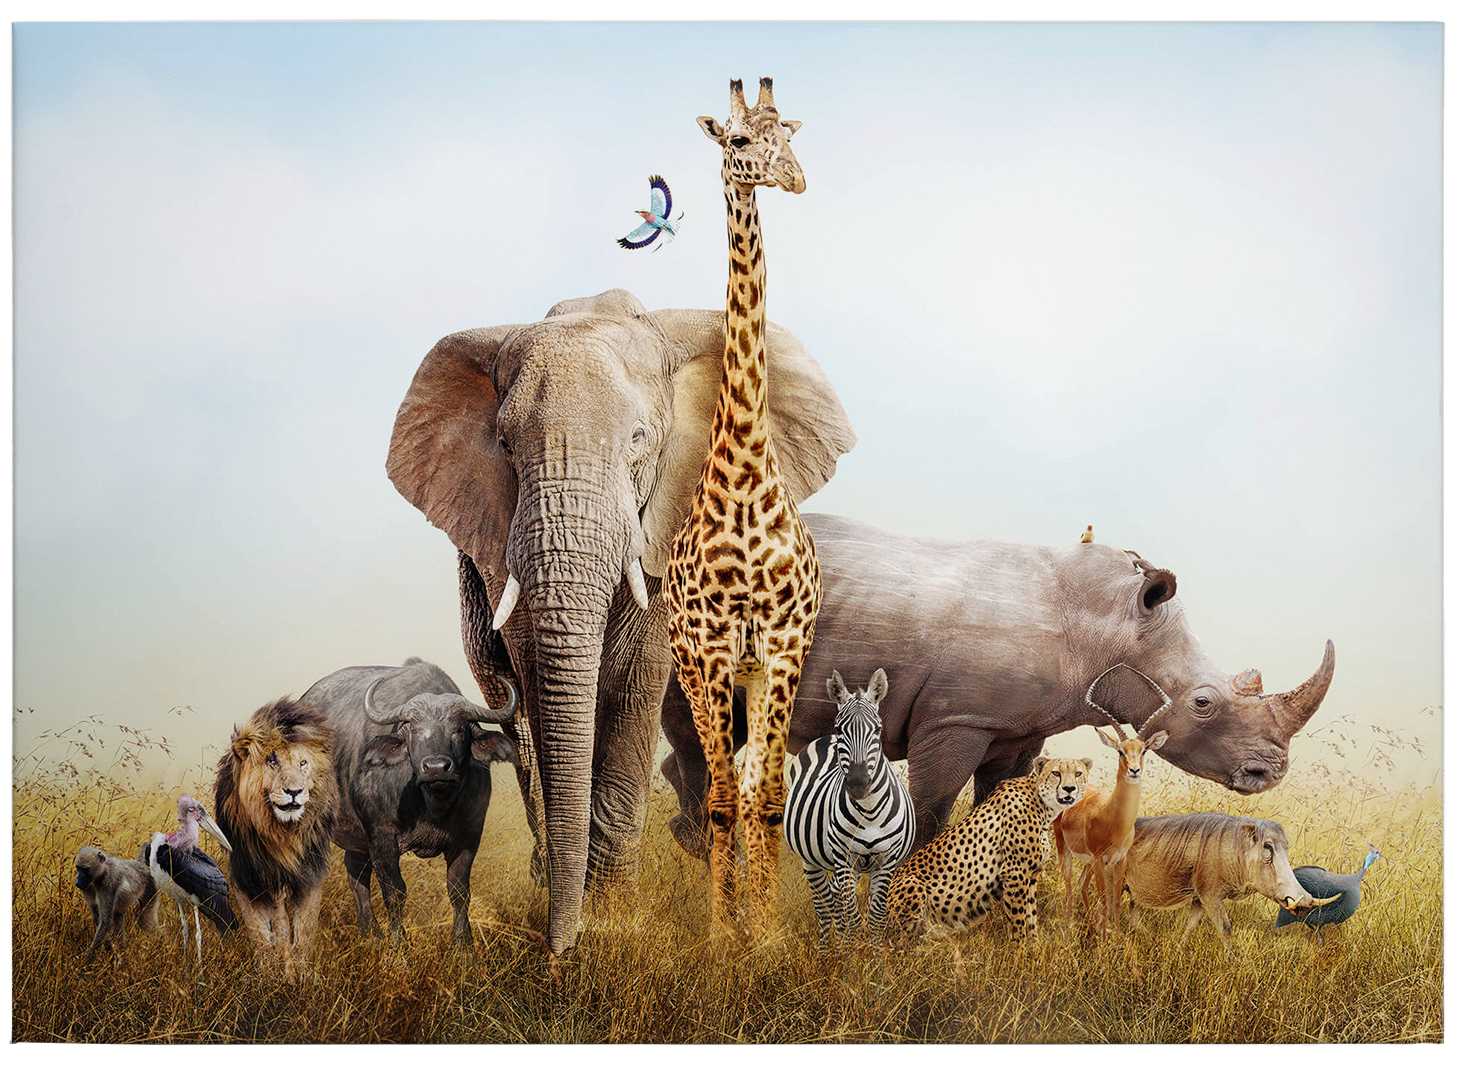             Canvas print African animals in nature
        